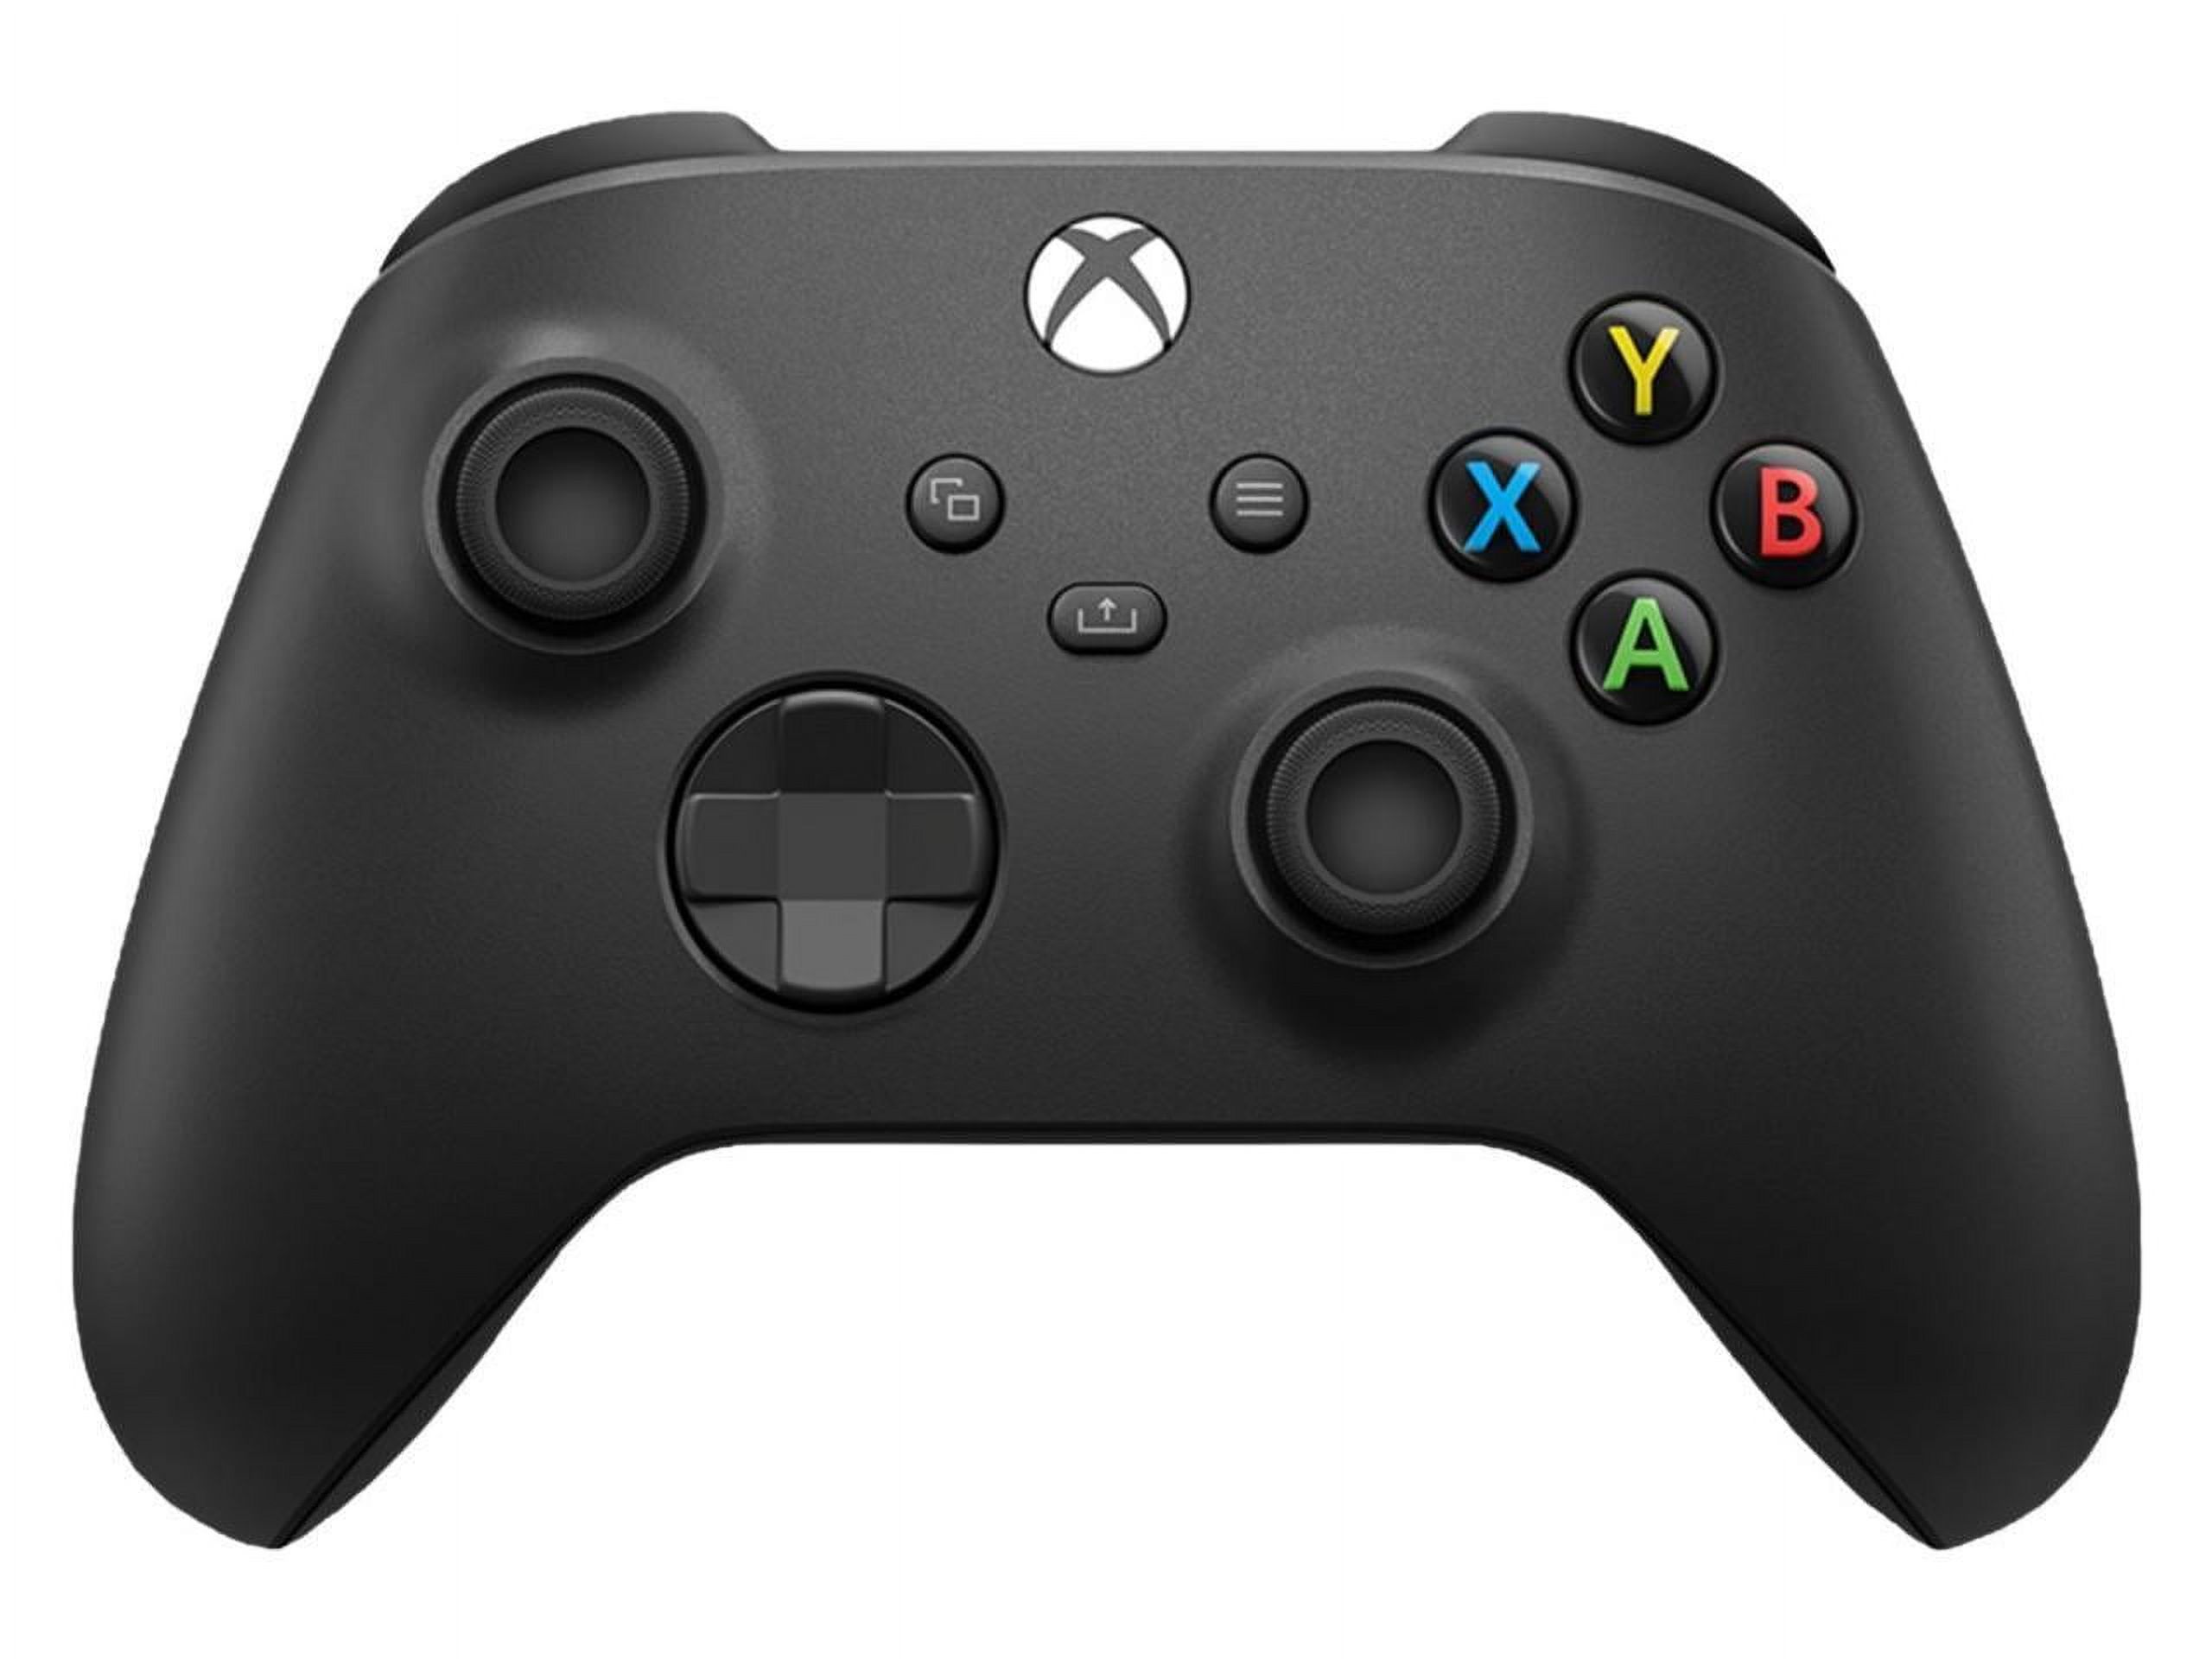 Microsoft Xbox Wireless Controller - Carbon Black - image 1 of 5